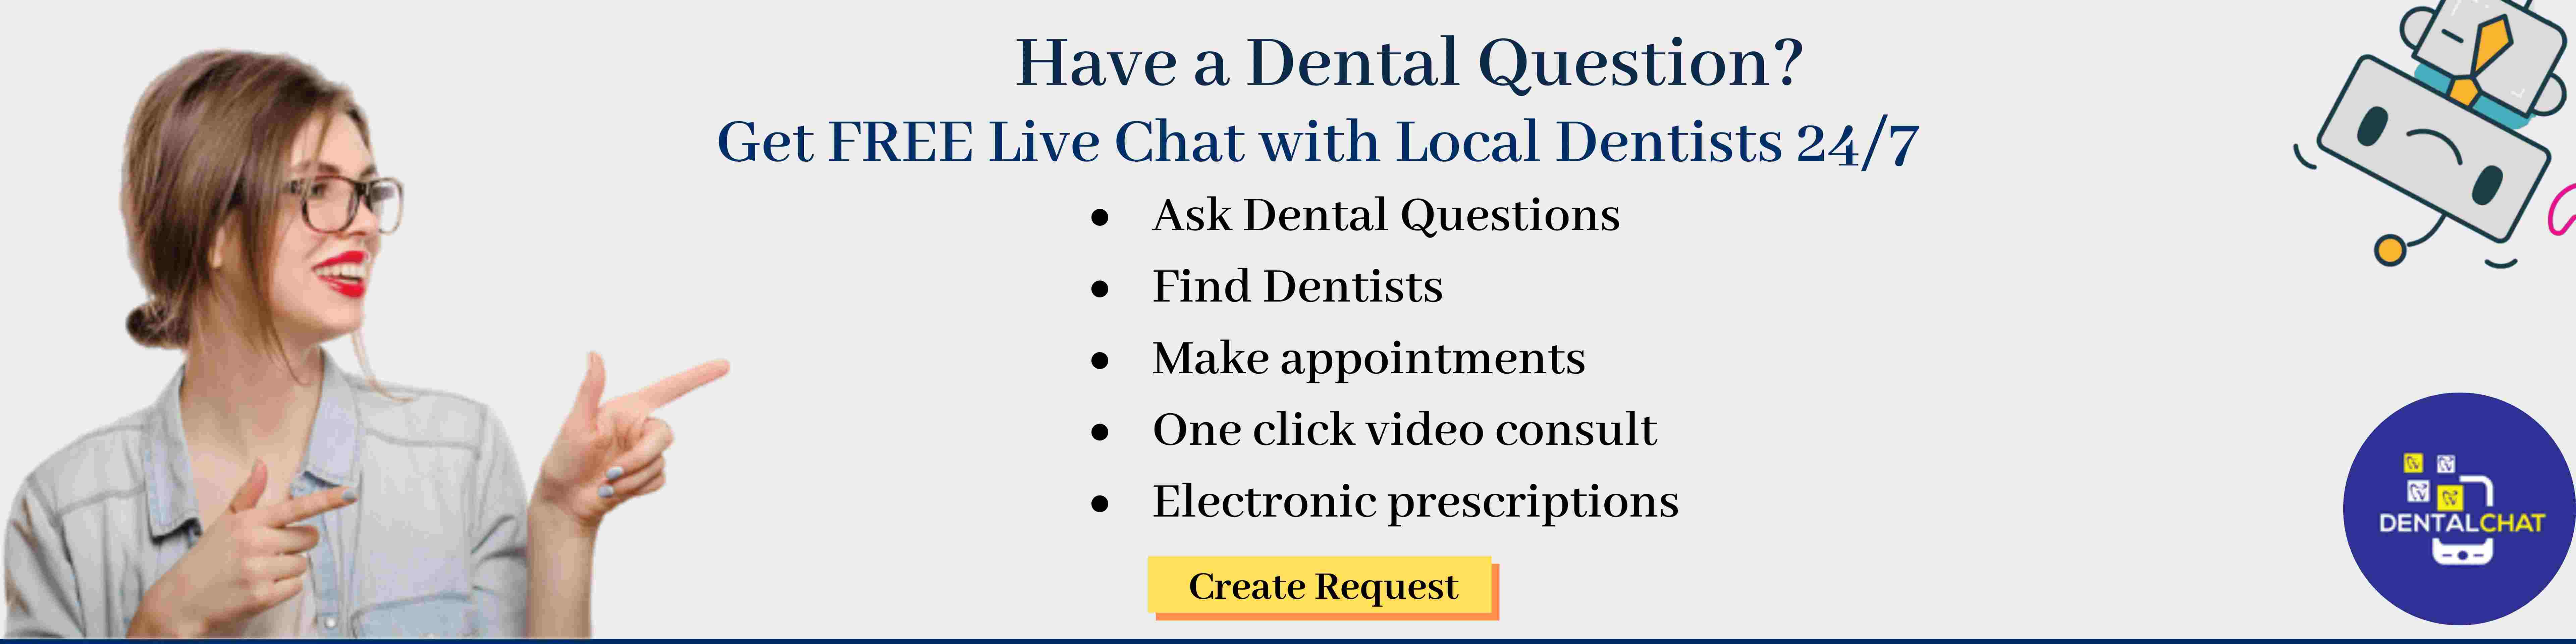 Local teledentistry service, online teledental consulting and local teledentist office guide